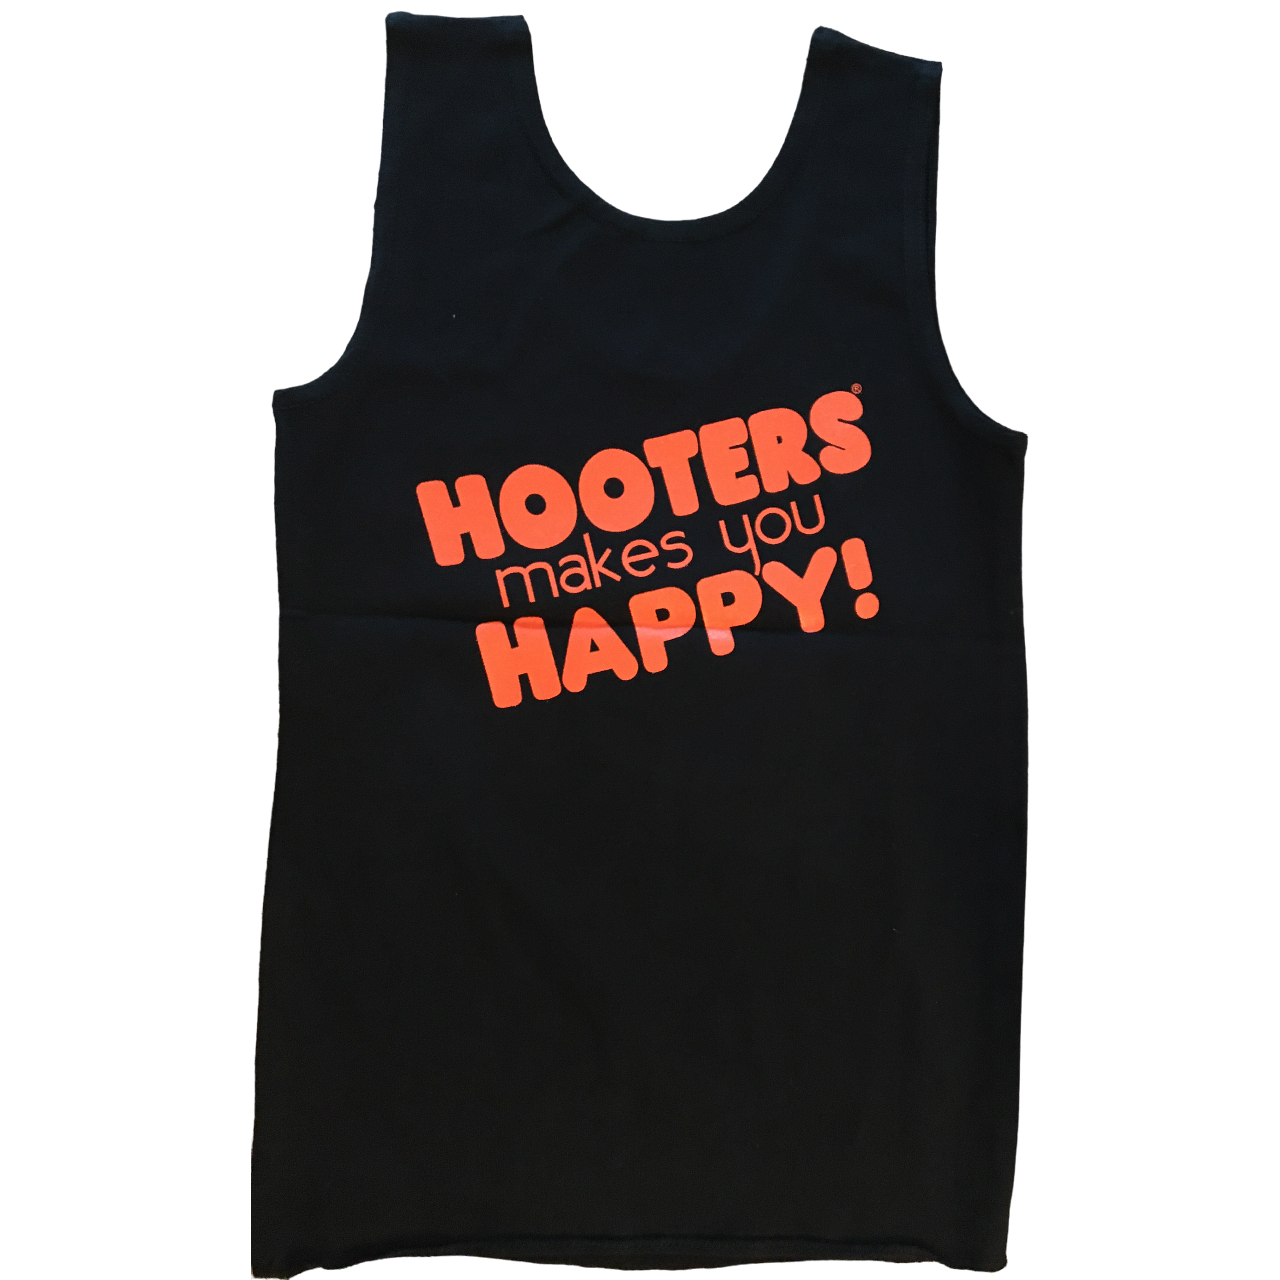 Hooters Women's Outfit Costume Spandex Black Tank Top